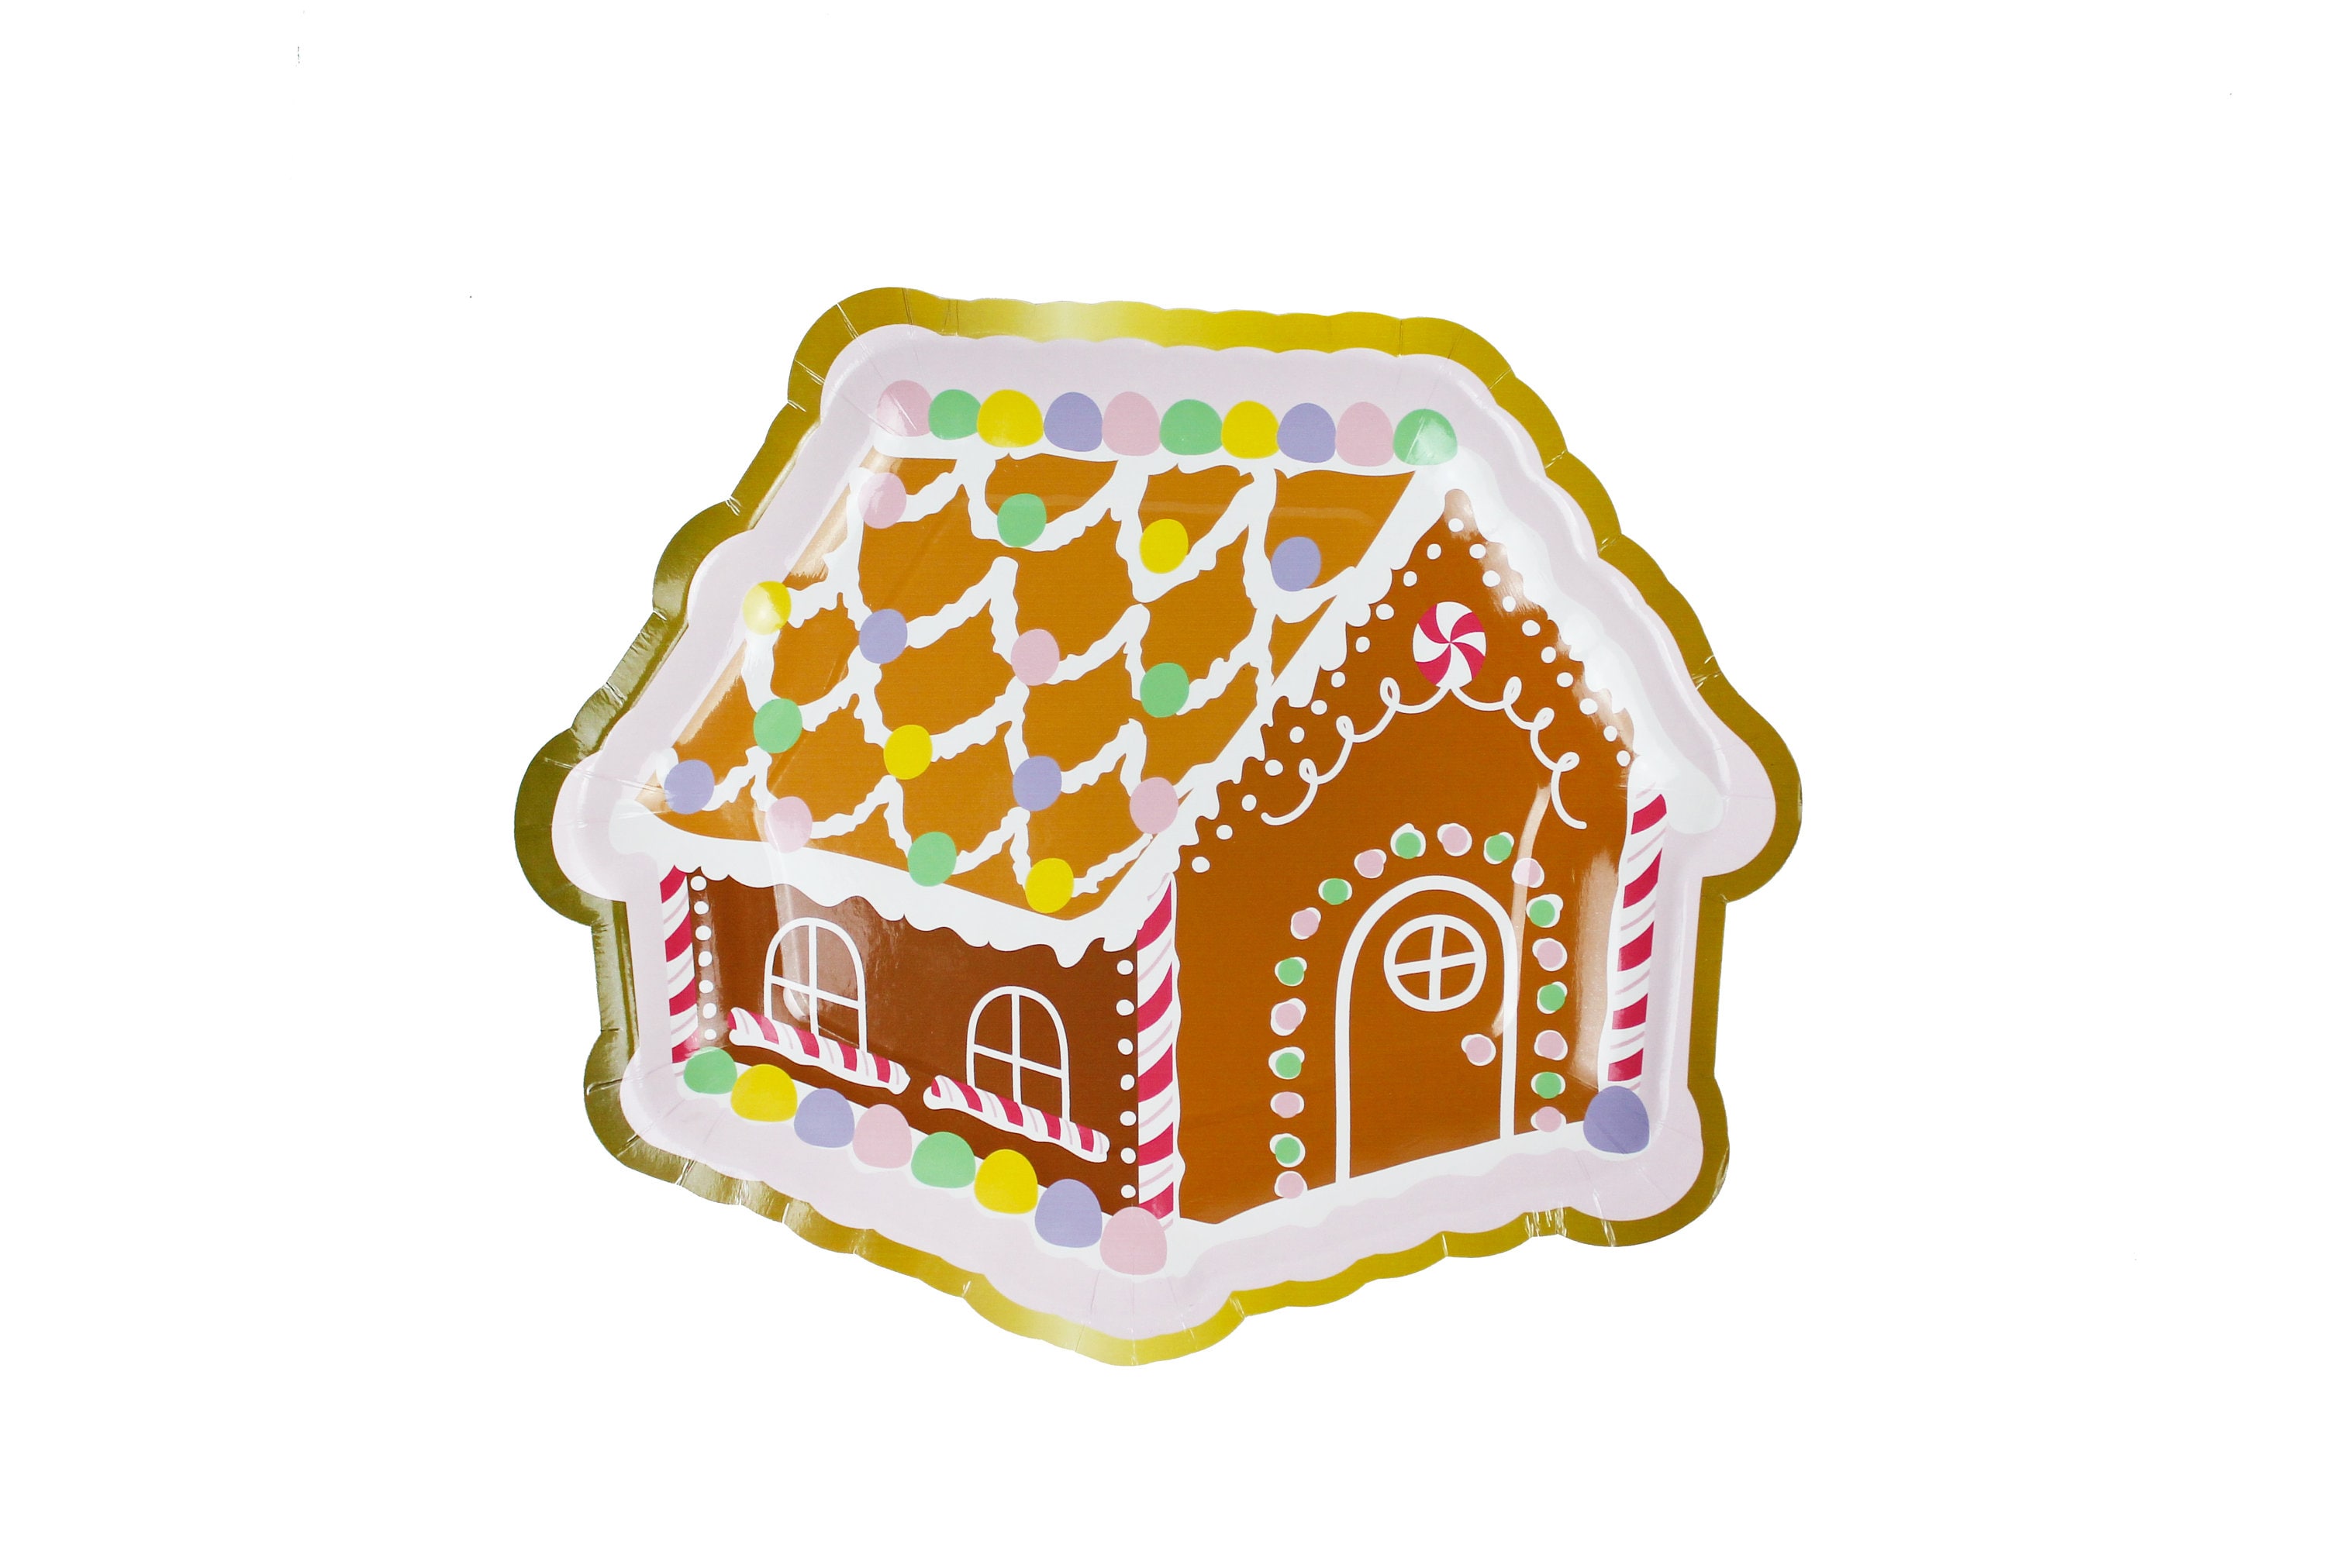 Pink Gingerbread House Paper Cups 12ct